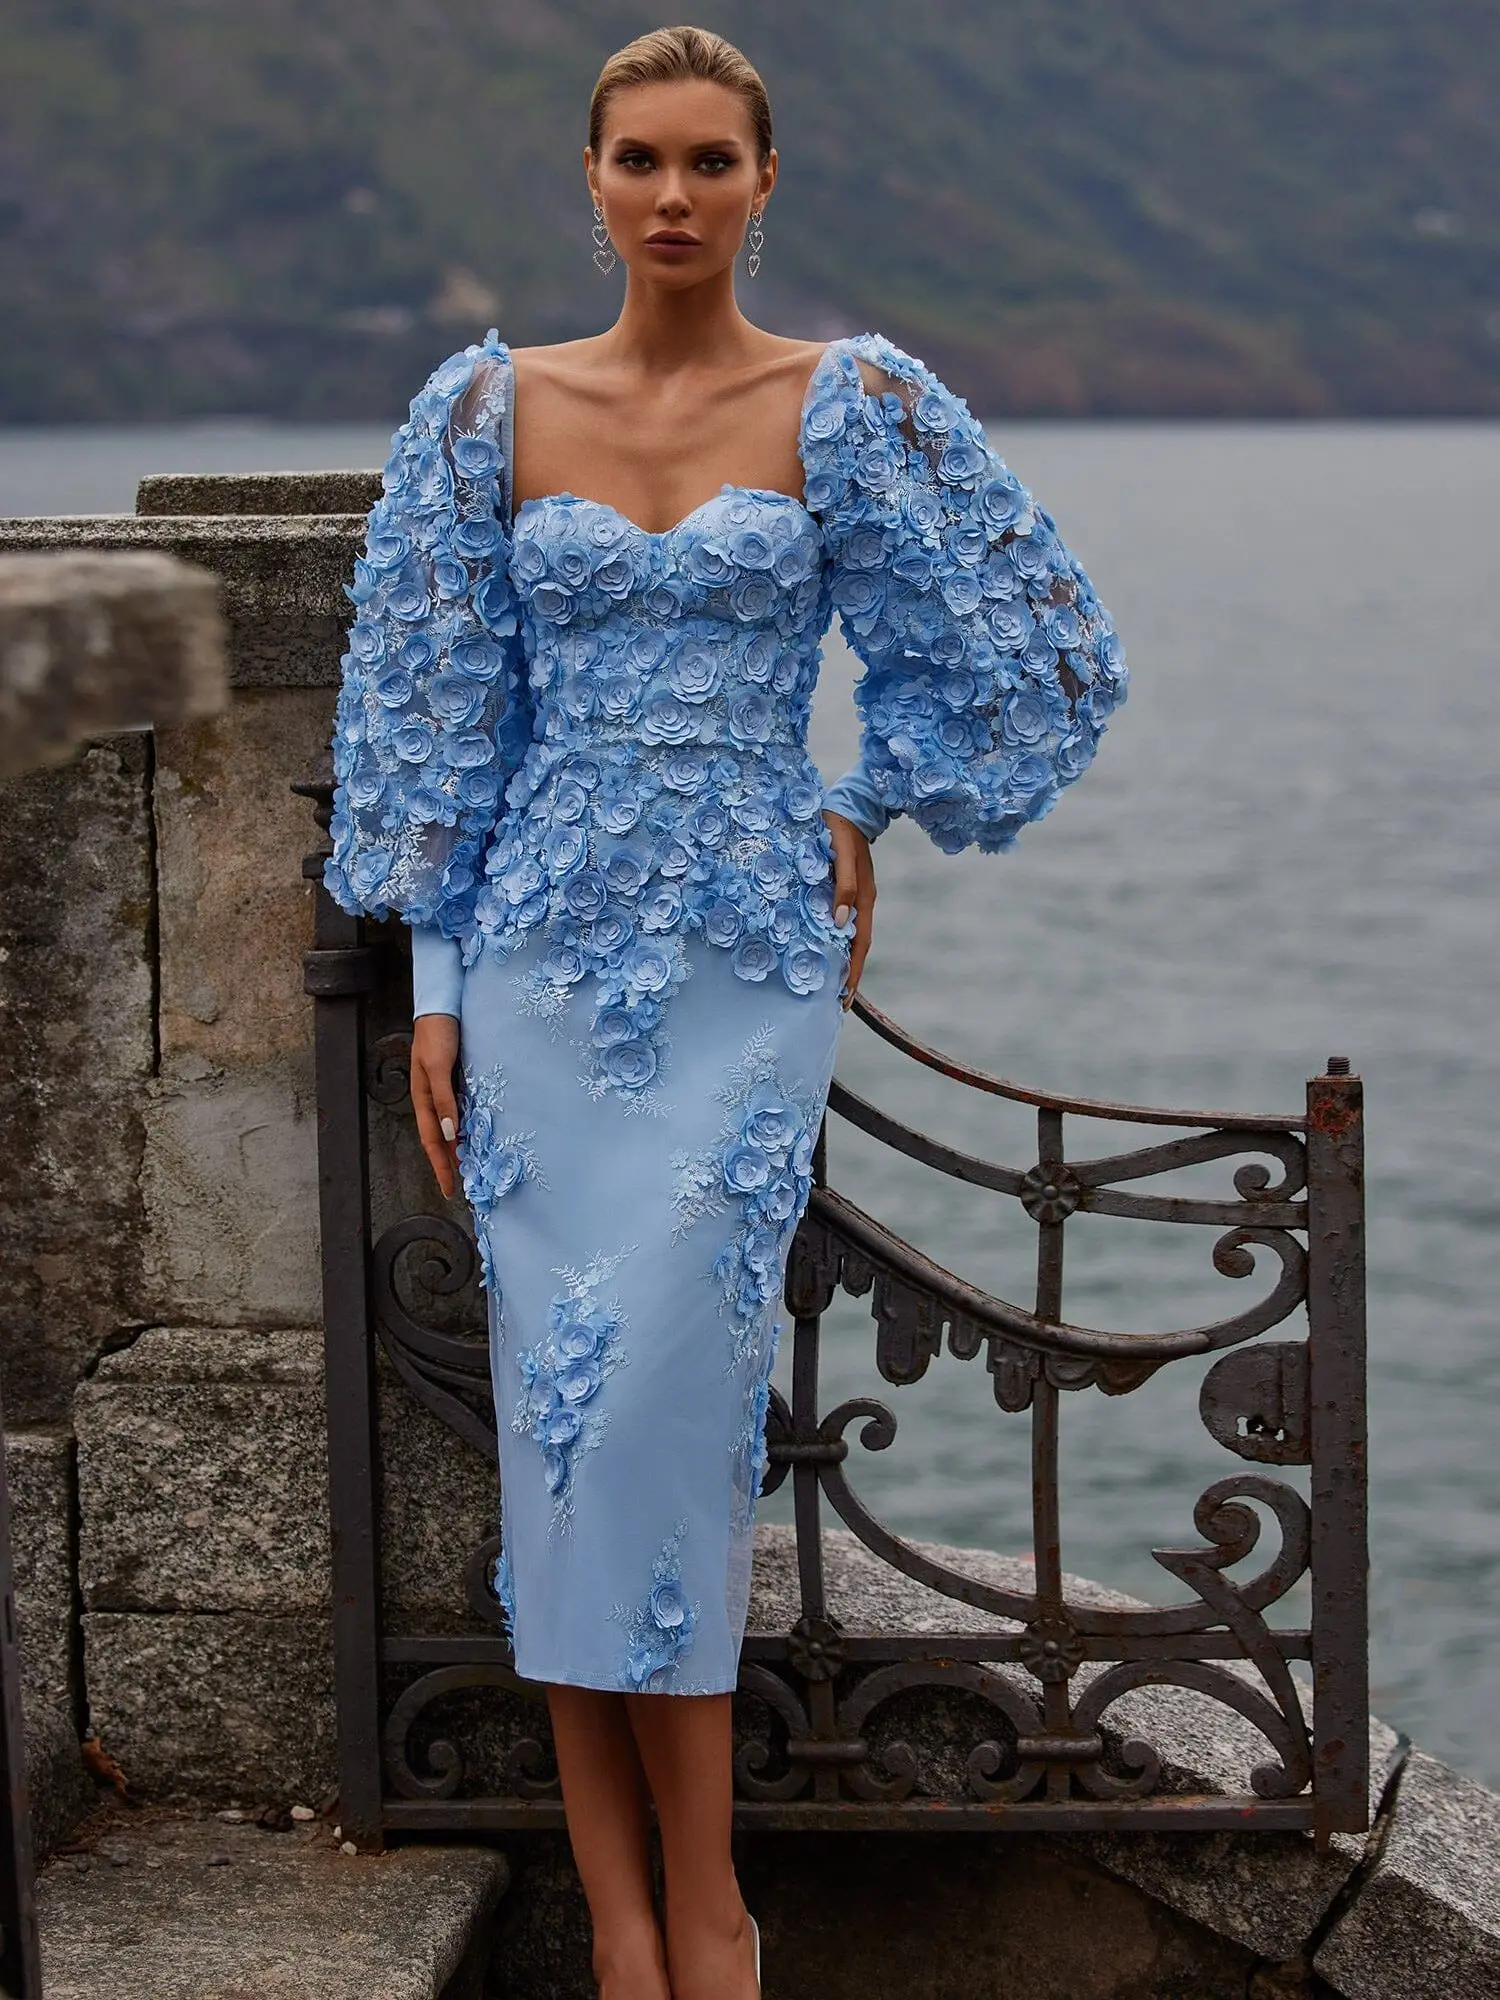 

Gorgeous Blue Mermaid Prom Gown Sweetheart Long Puff Sleeves 3D Floral Appliqued Evening Dress Tea Length Robes De Soriee Custom